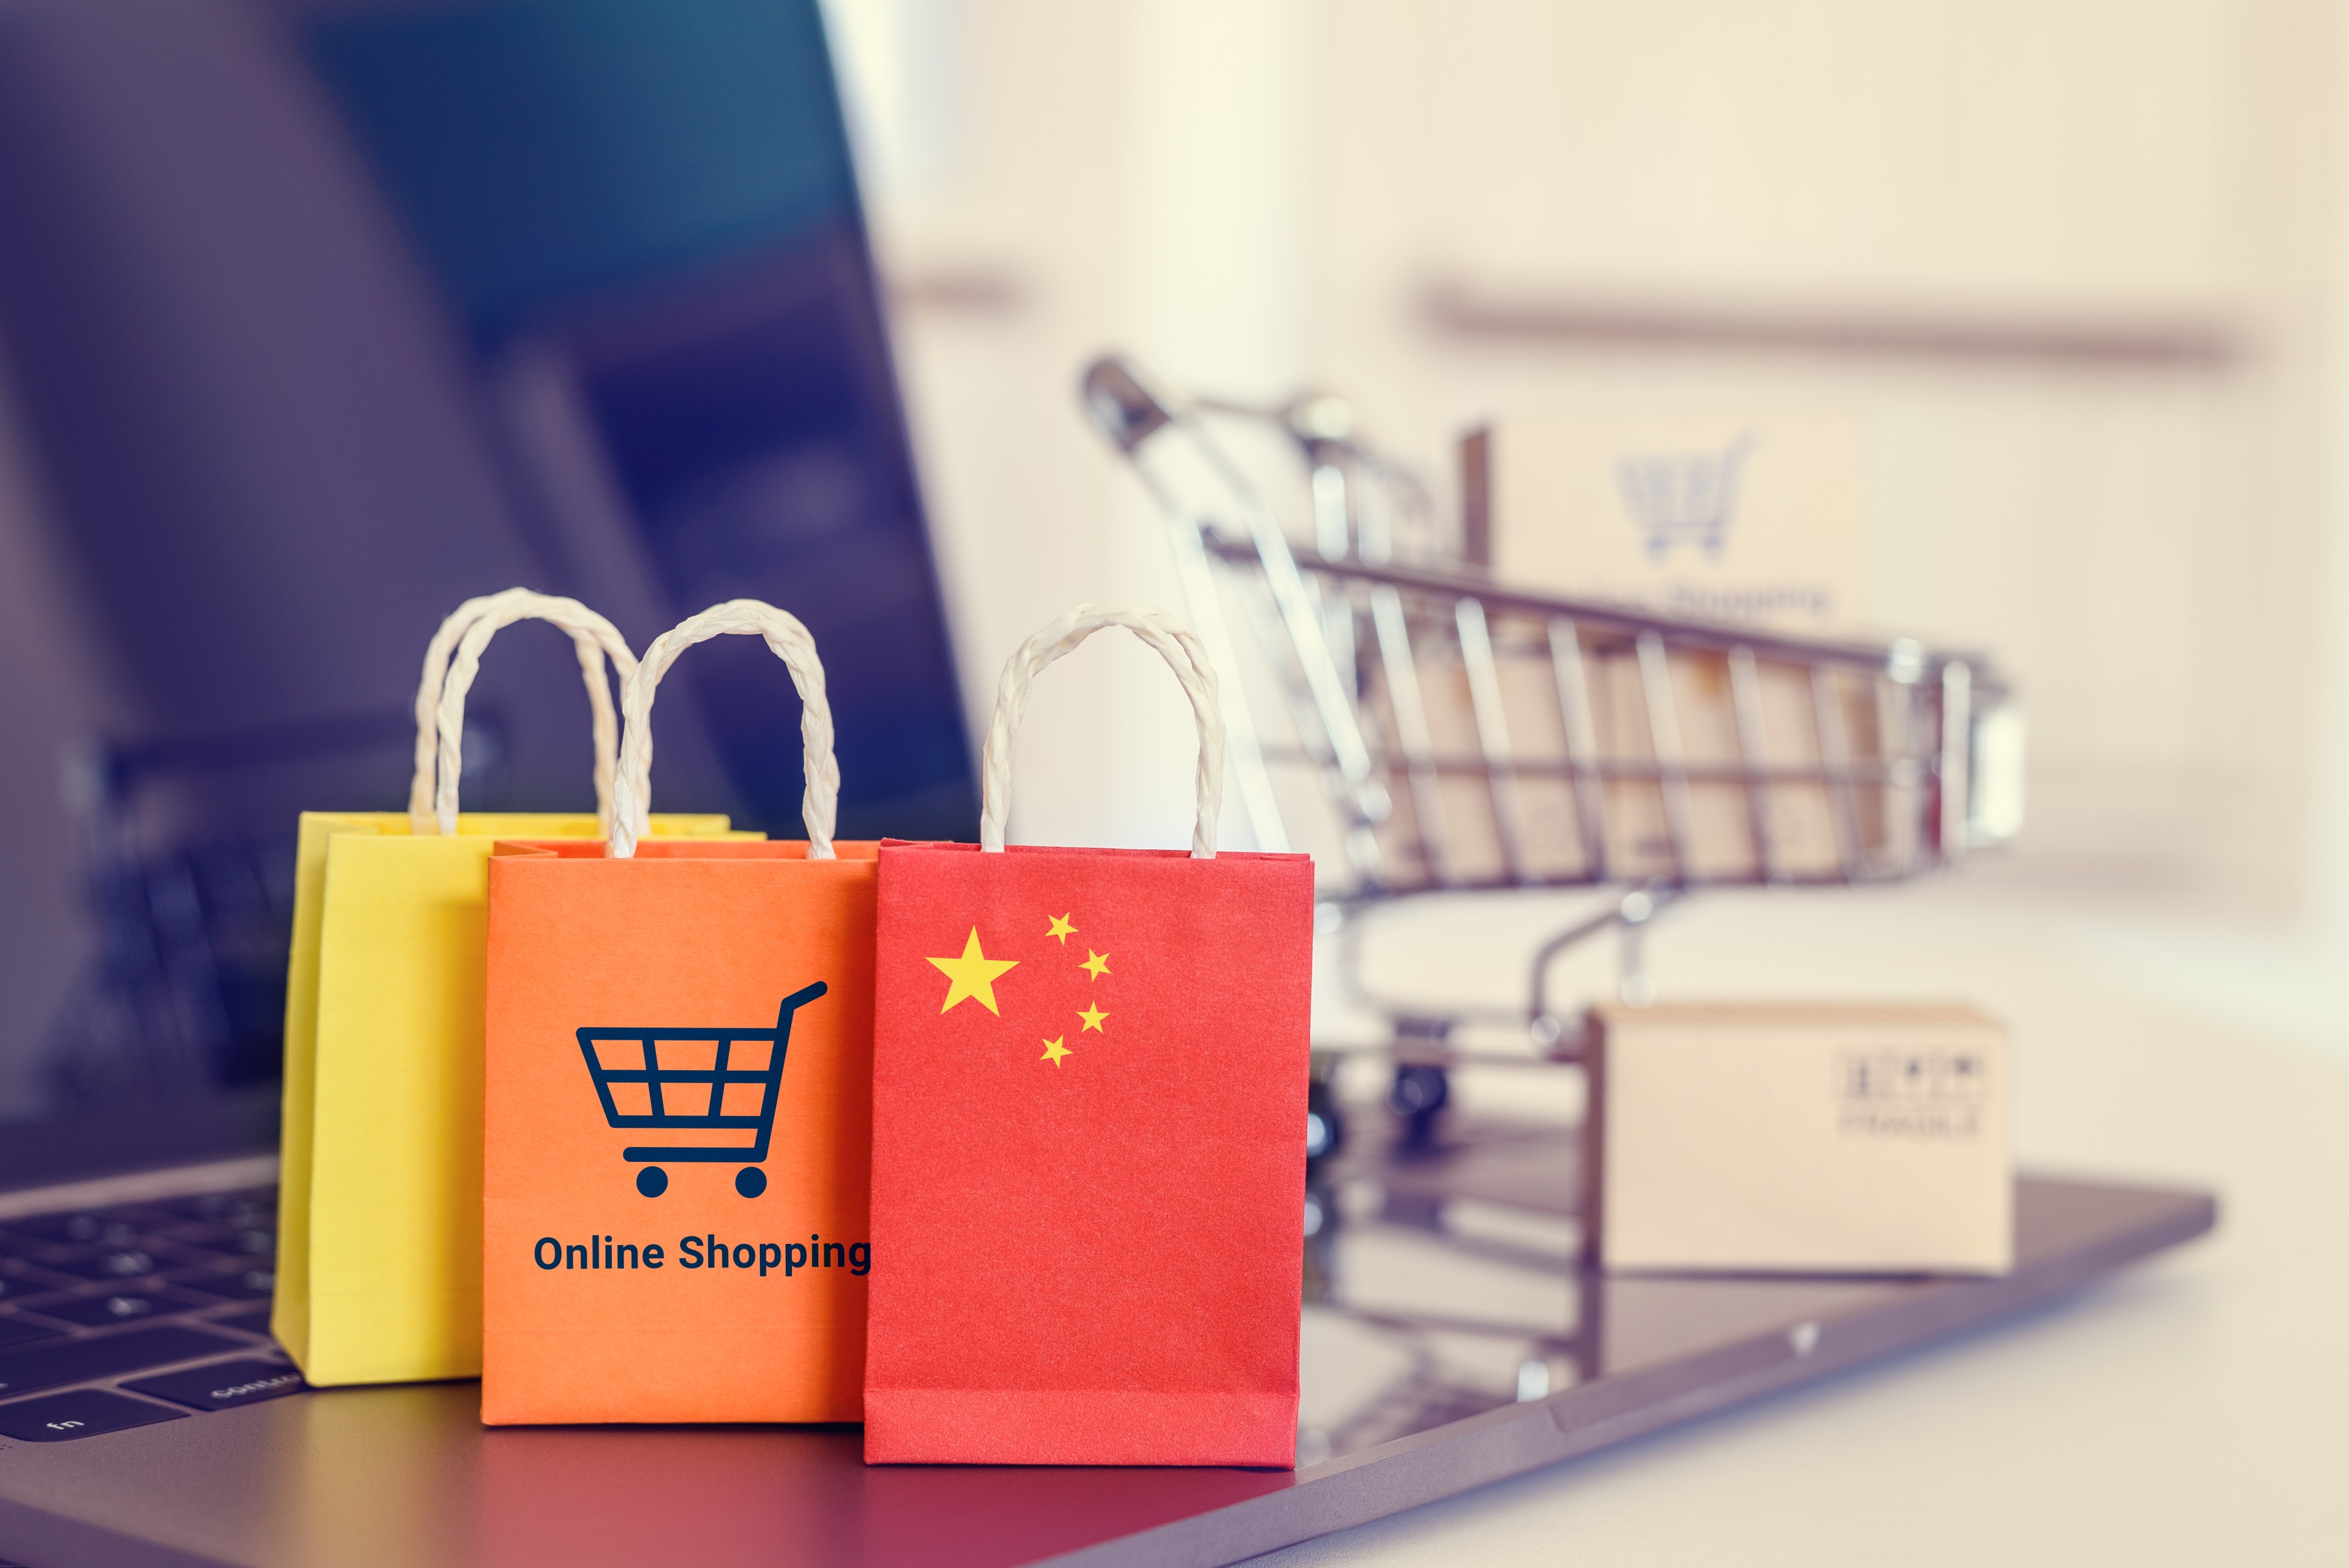 Beijing’s latest initiative would do away with offline supervision and inspection of online retailers, helping minimise interference with their normal business activities. Photo: Shutterstock